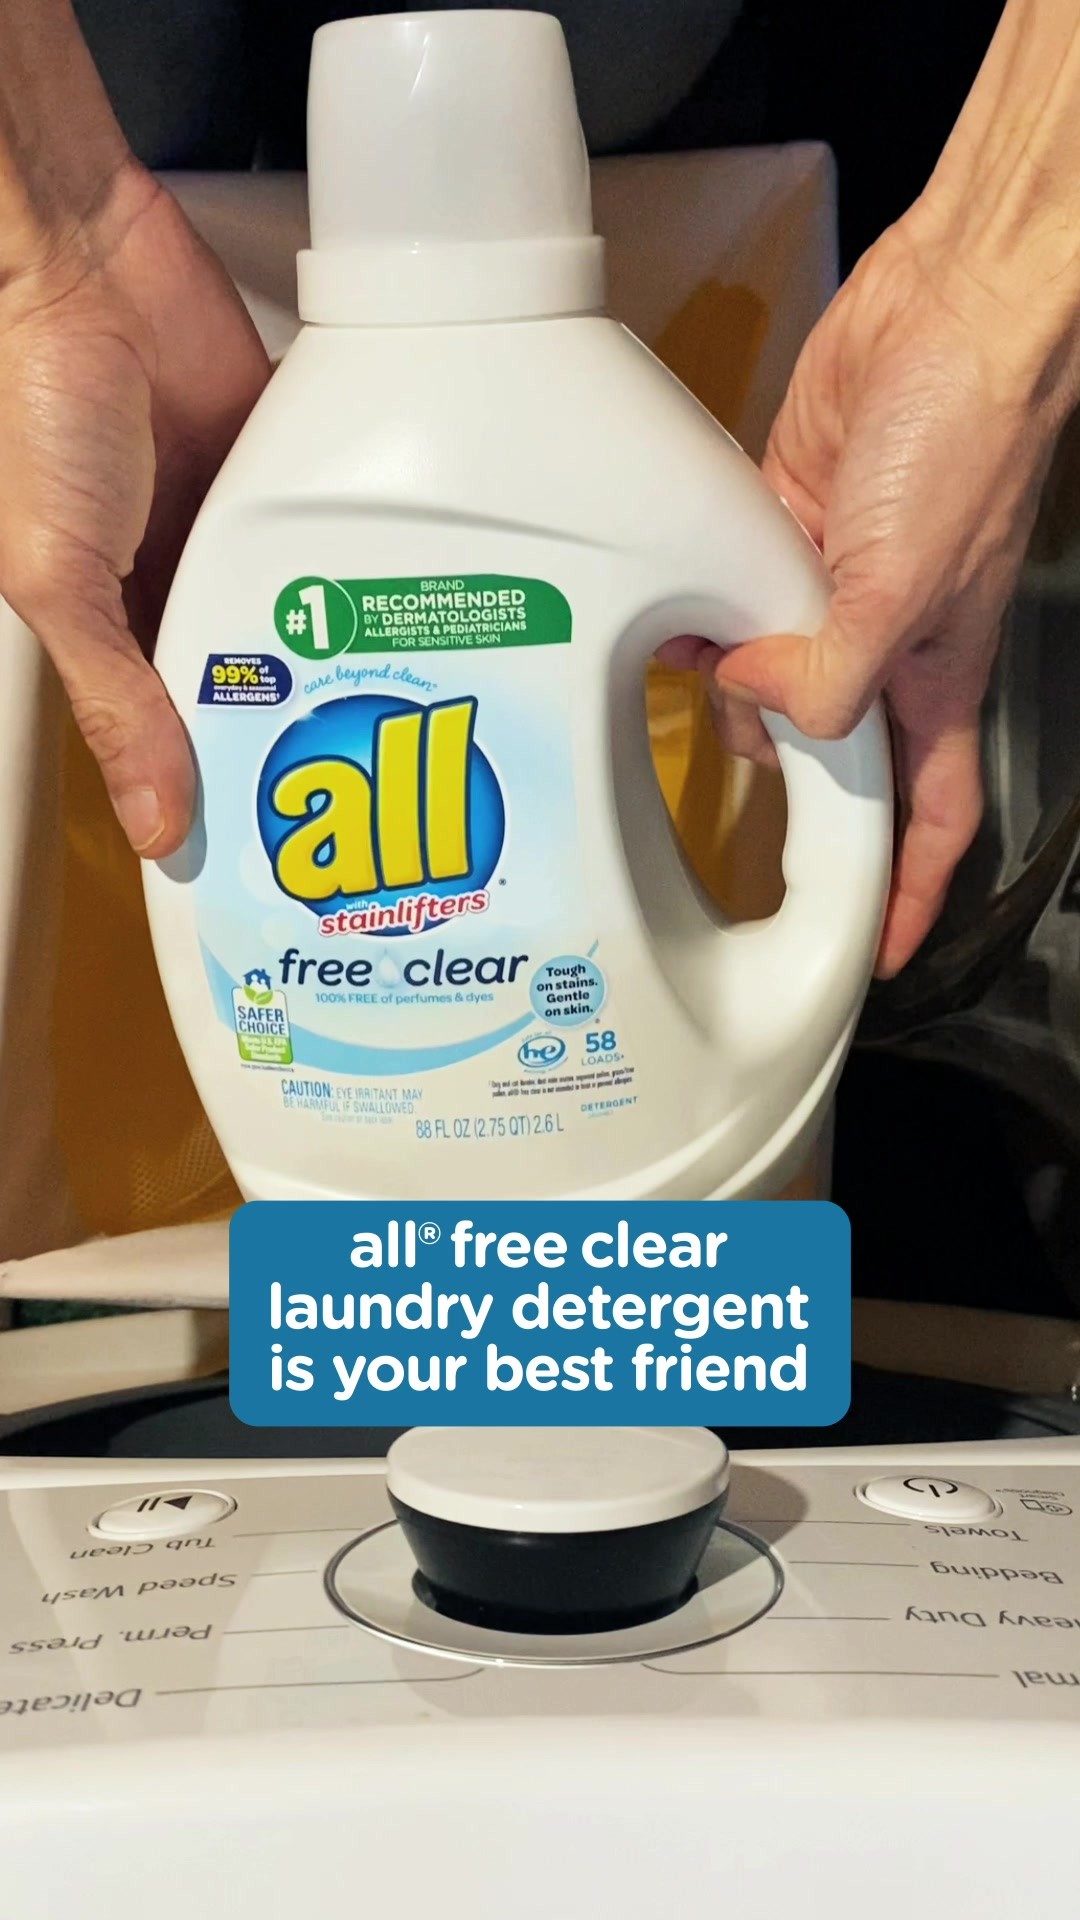 All Detergent, with Stainlifters, Free Clear - 88 fl oz